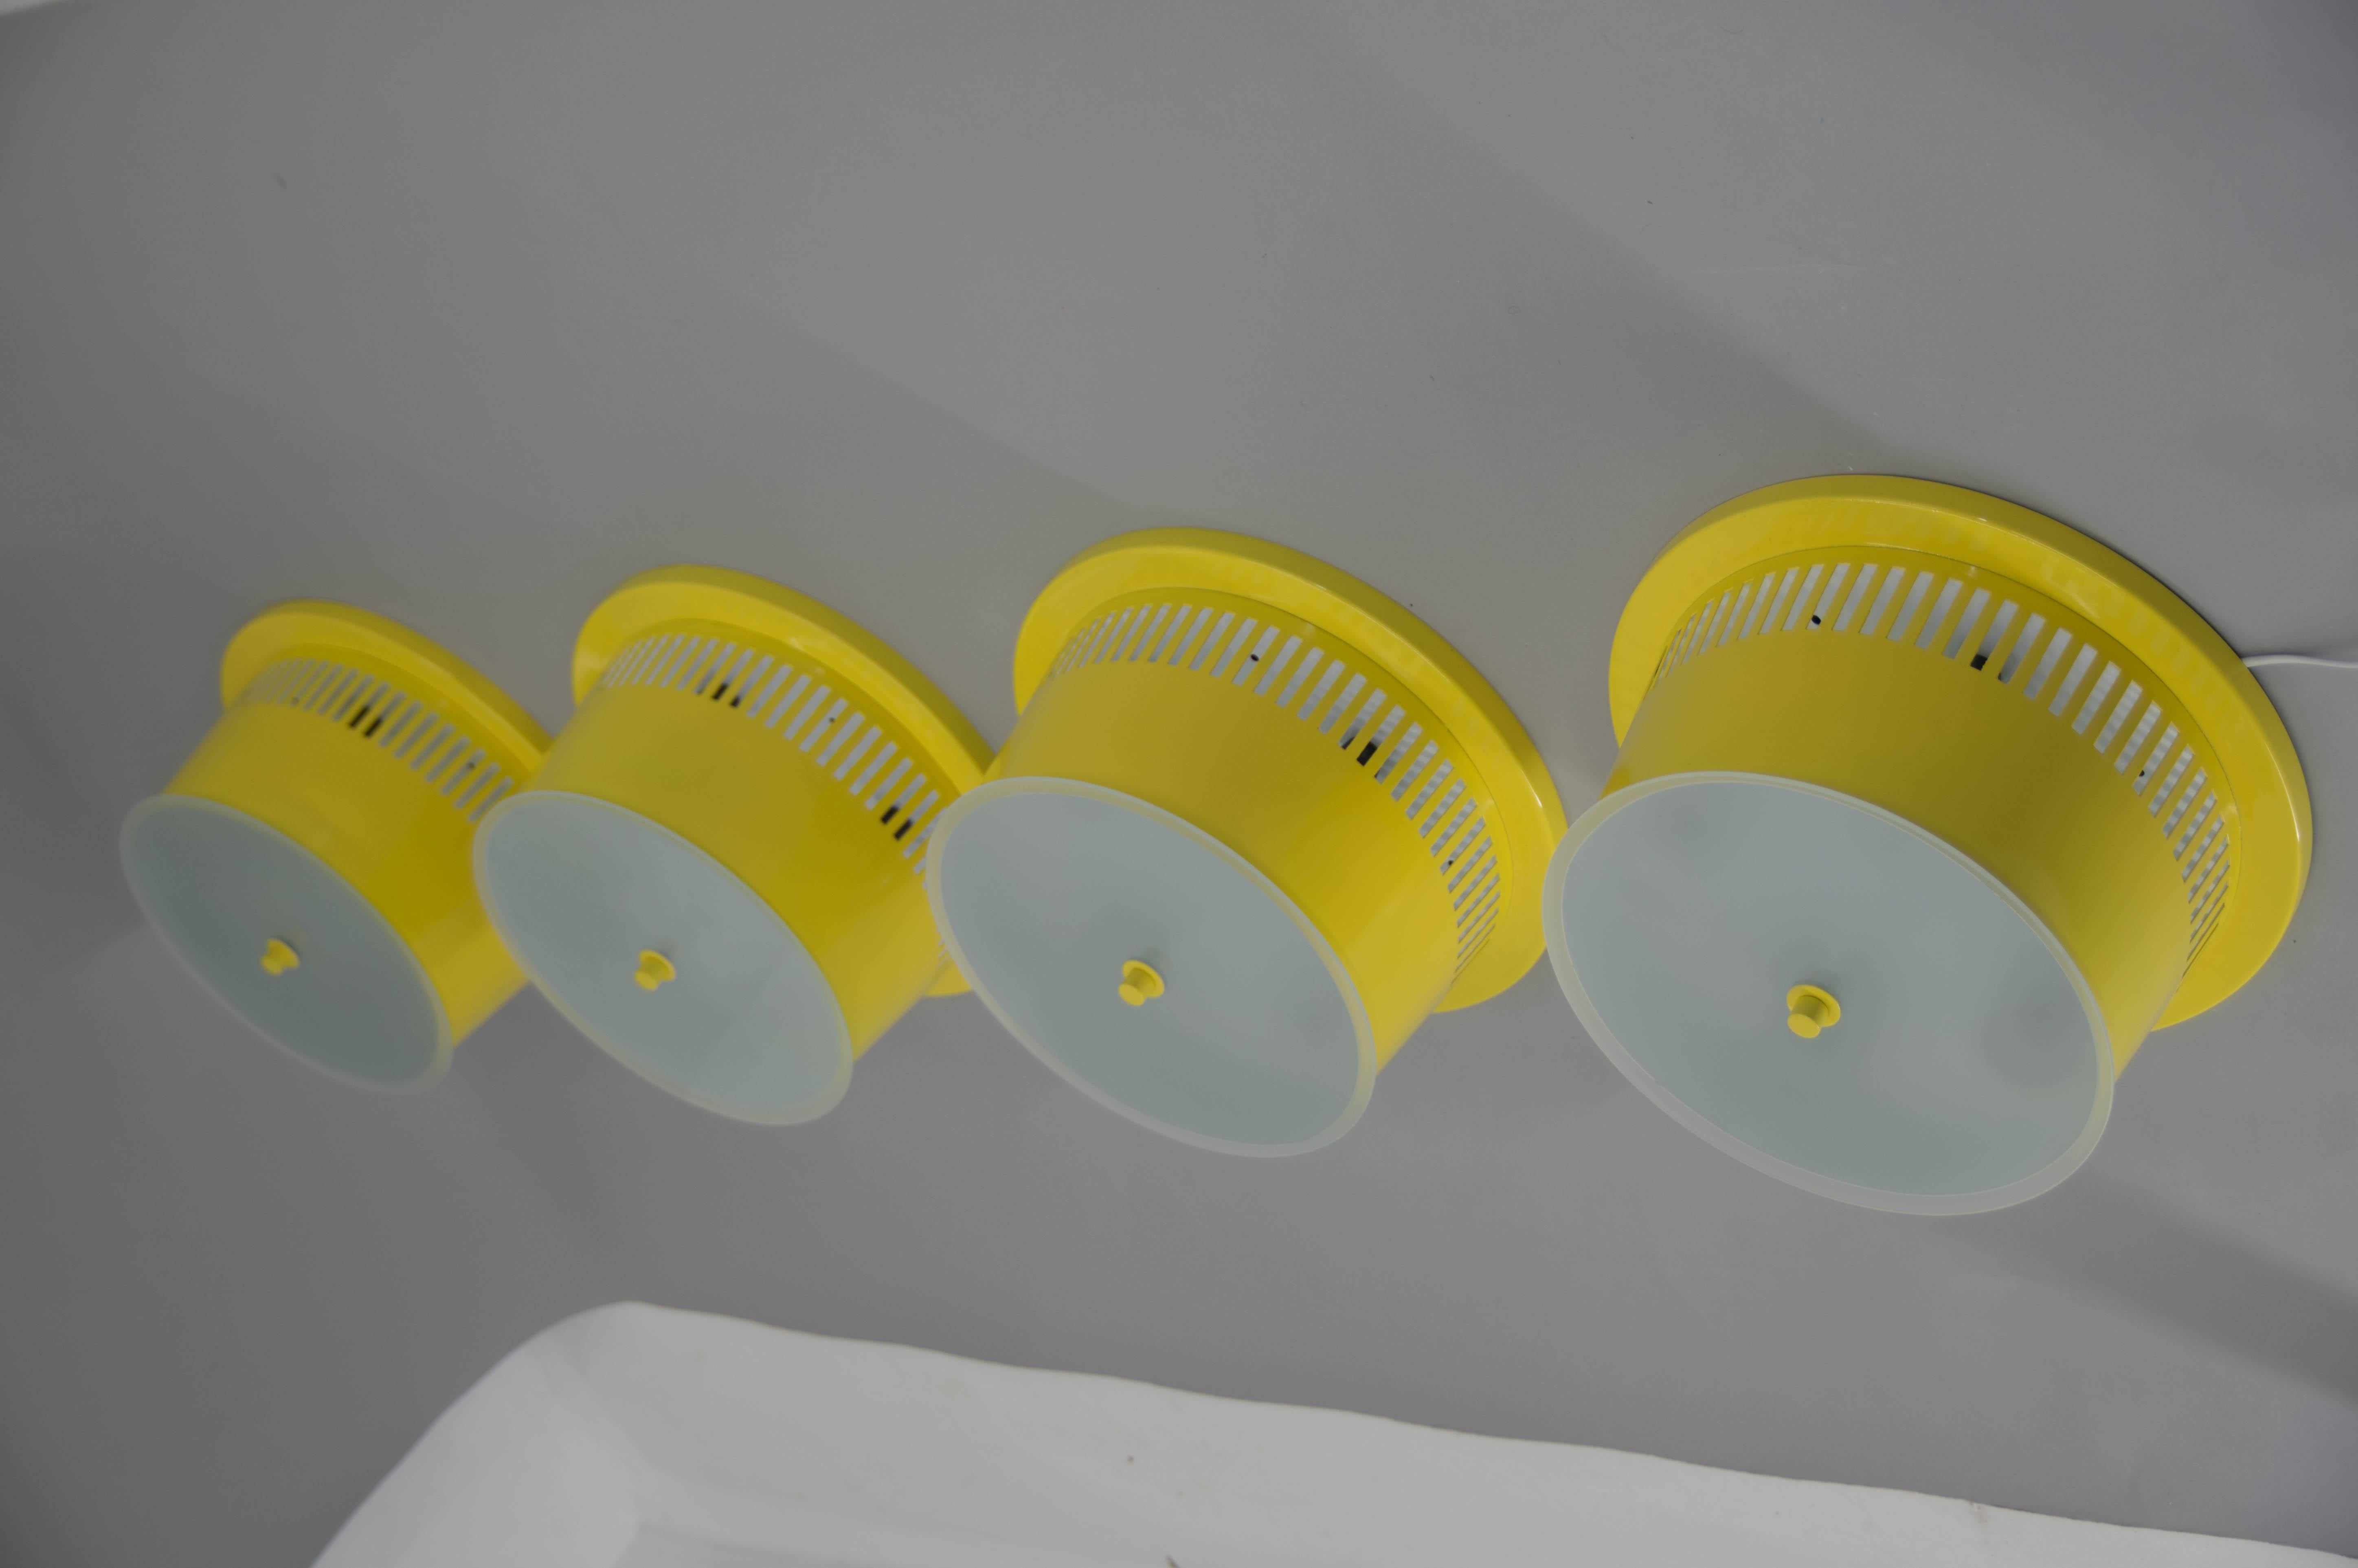 Metal Big Yellow Flush Mount, 1960s, 4 Items Available, Restored For Sale